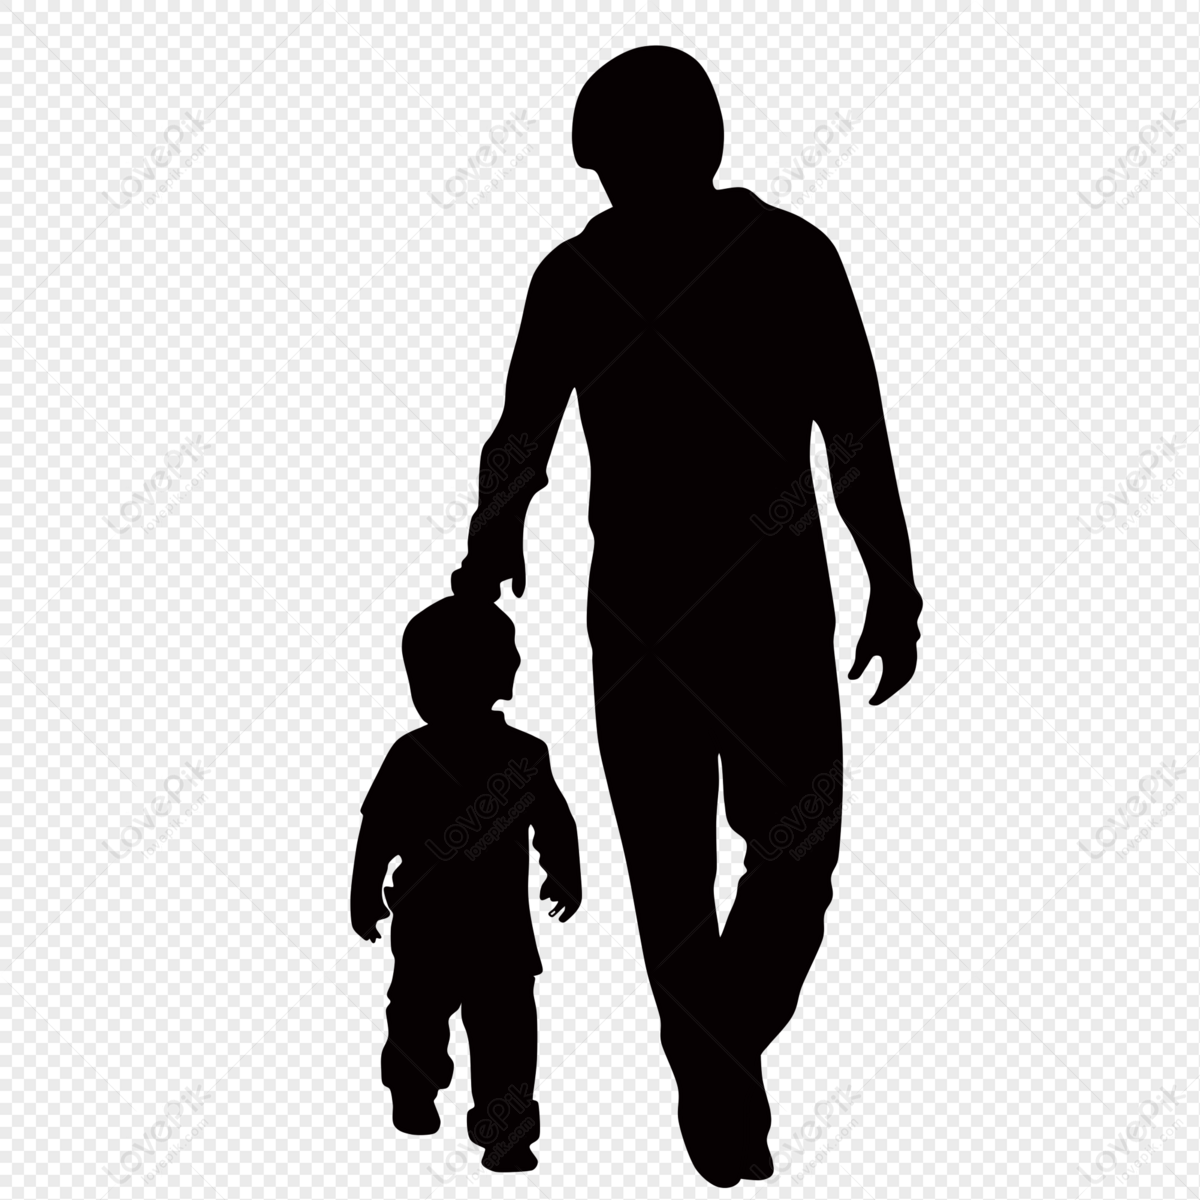 Father and son silhouette, dad and son silhouette, child, fathers love png white transparent